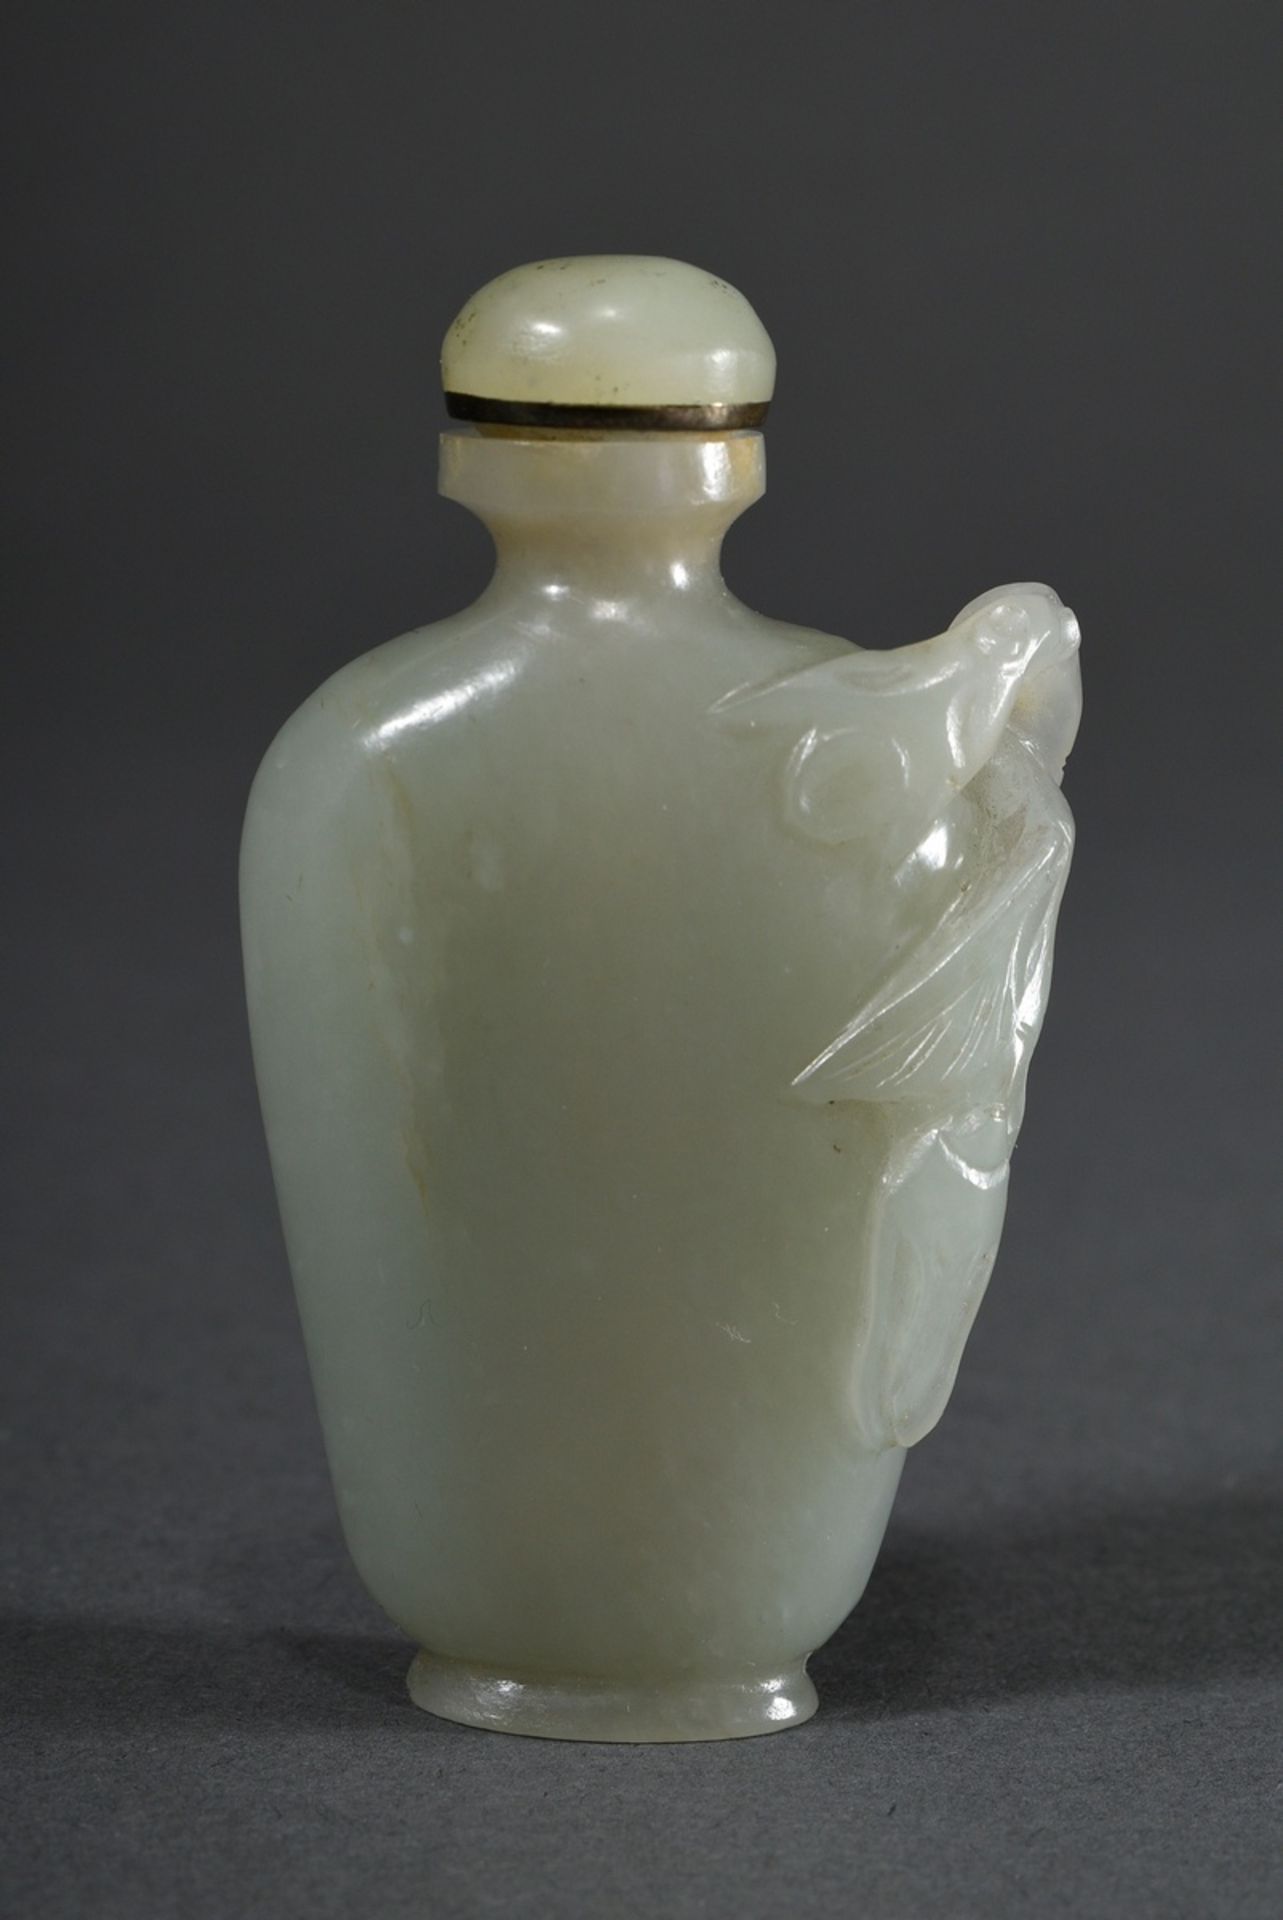 Seladon jade snuffbottle with "flower and leaf decoration" in high relief, China probably Qing dyna - Image 2 of 5